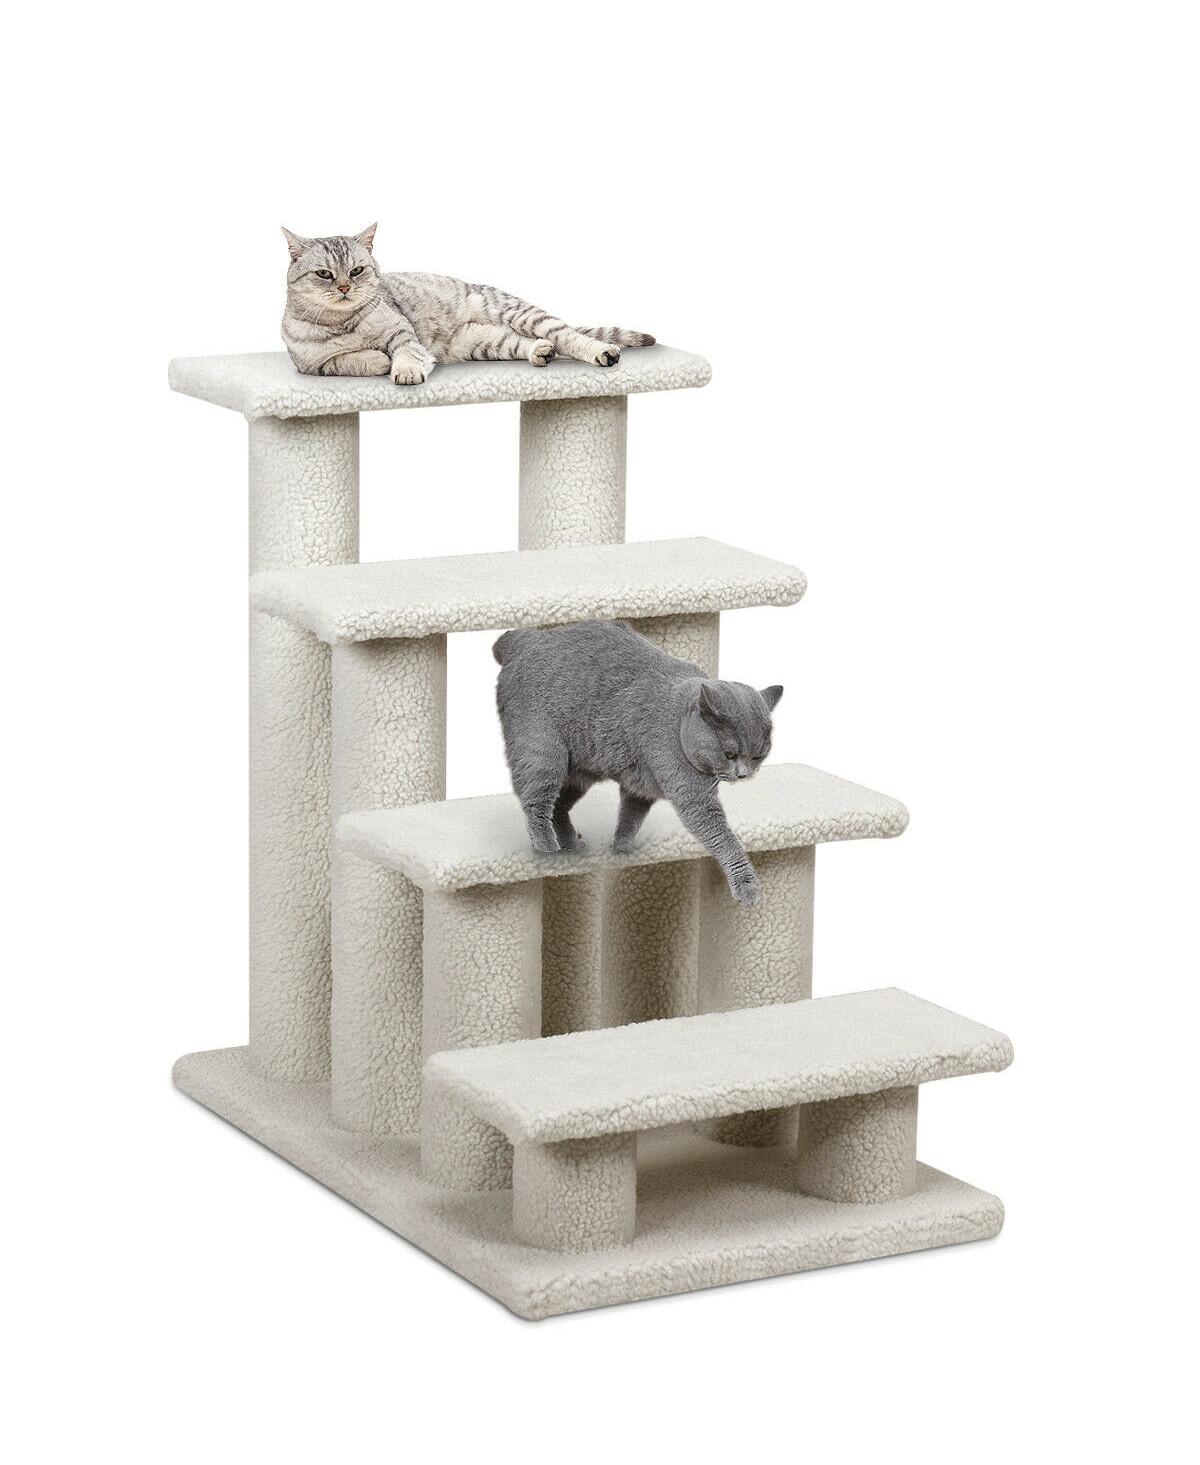 24 Inch 4-Step Pet Stairs Carpeted Ladder Ramp Scratching Post Cat Tree Climber - Beige/khaki